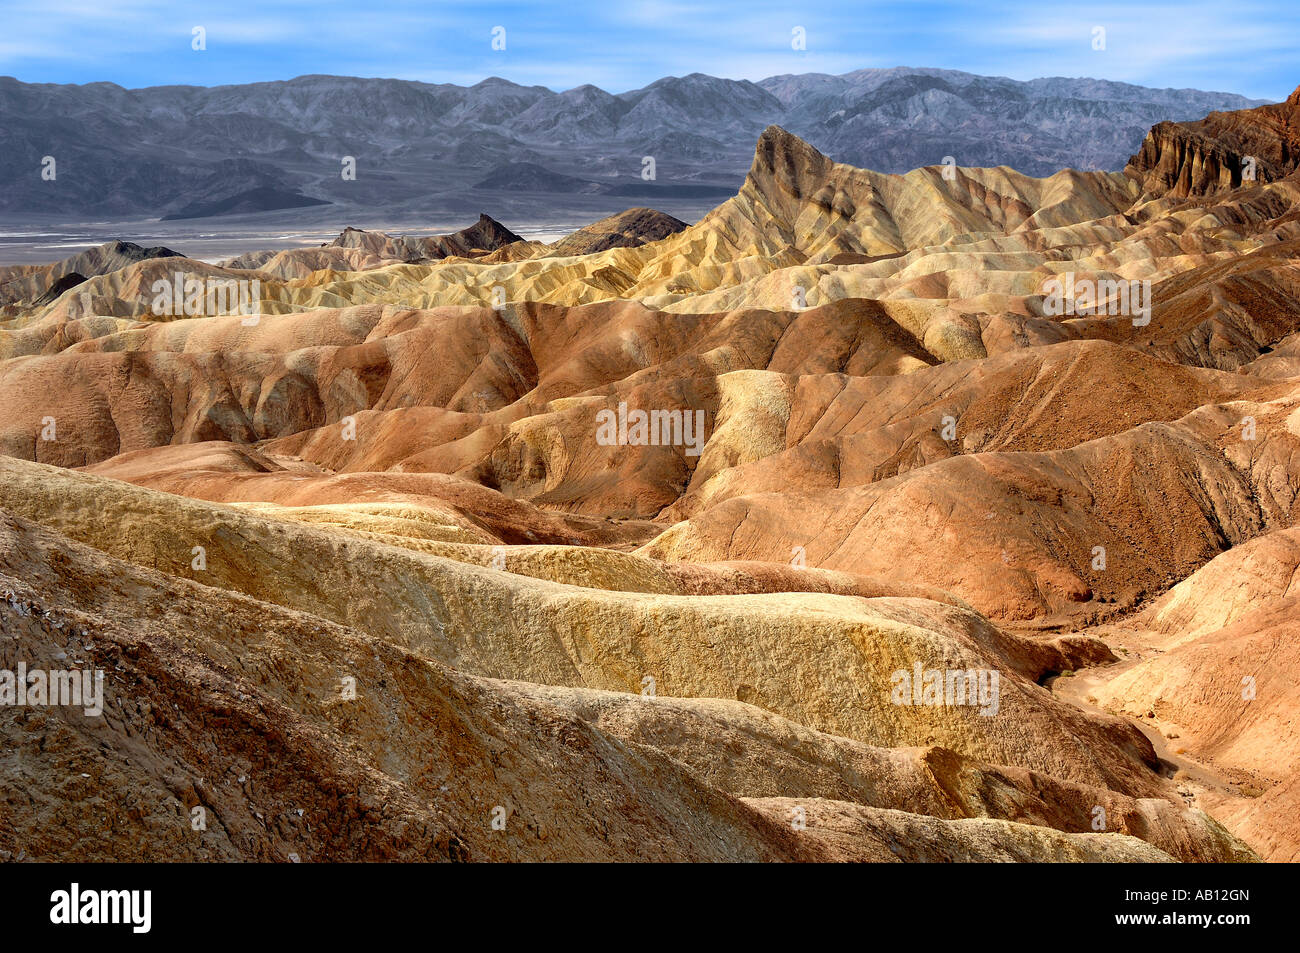 General view of Zabriskie Point, Death Valley National Park, California USA Stock Photo